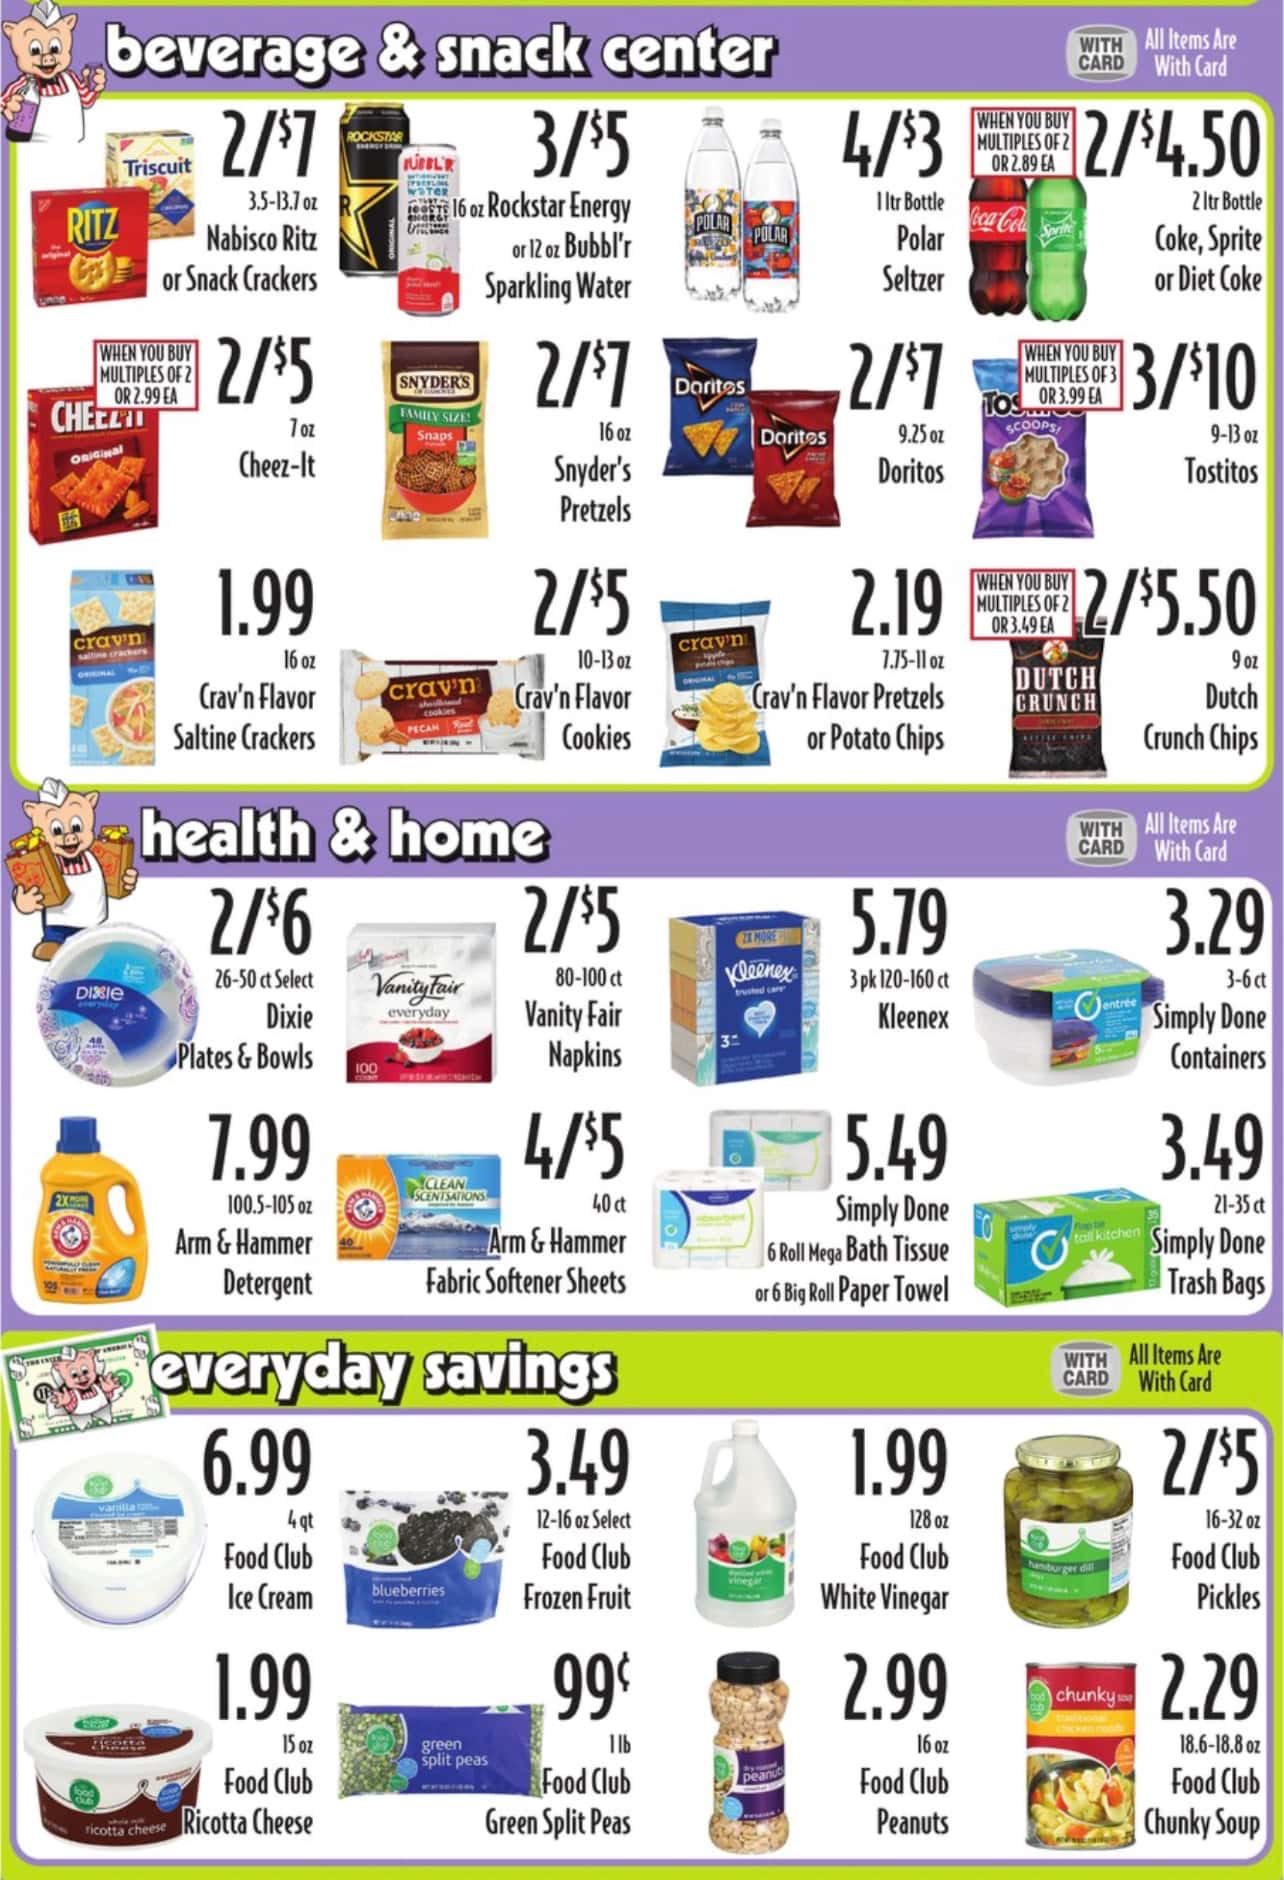 PigglyWiggly_weekly_ad_032724_04